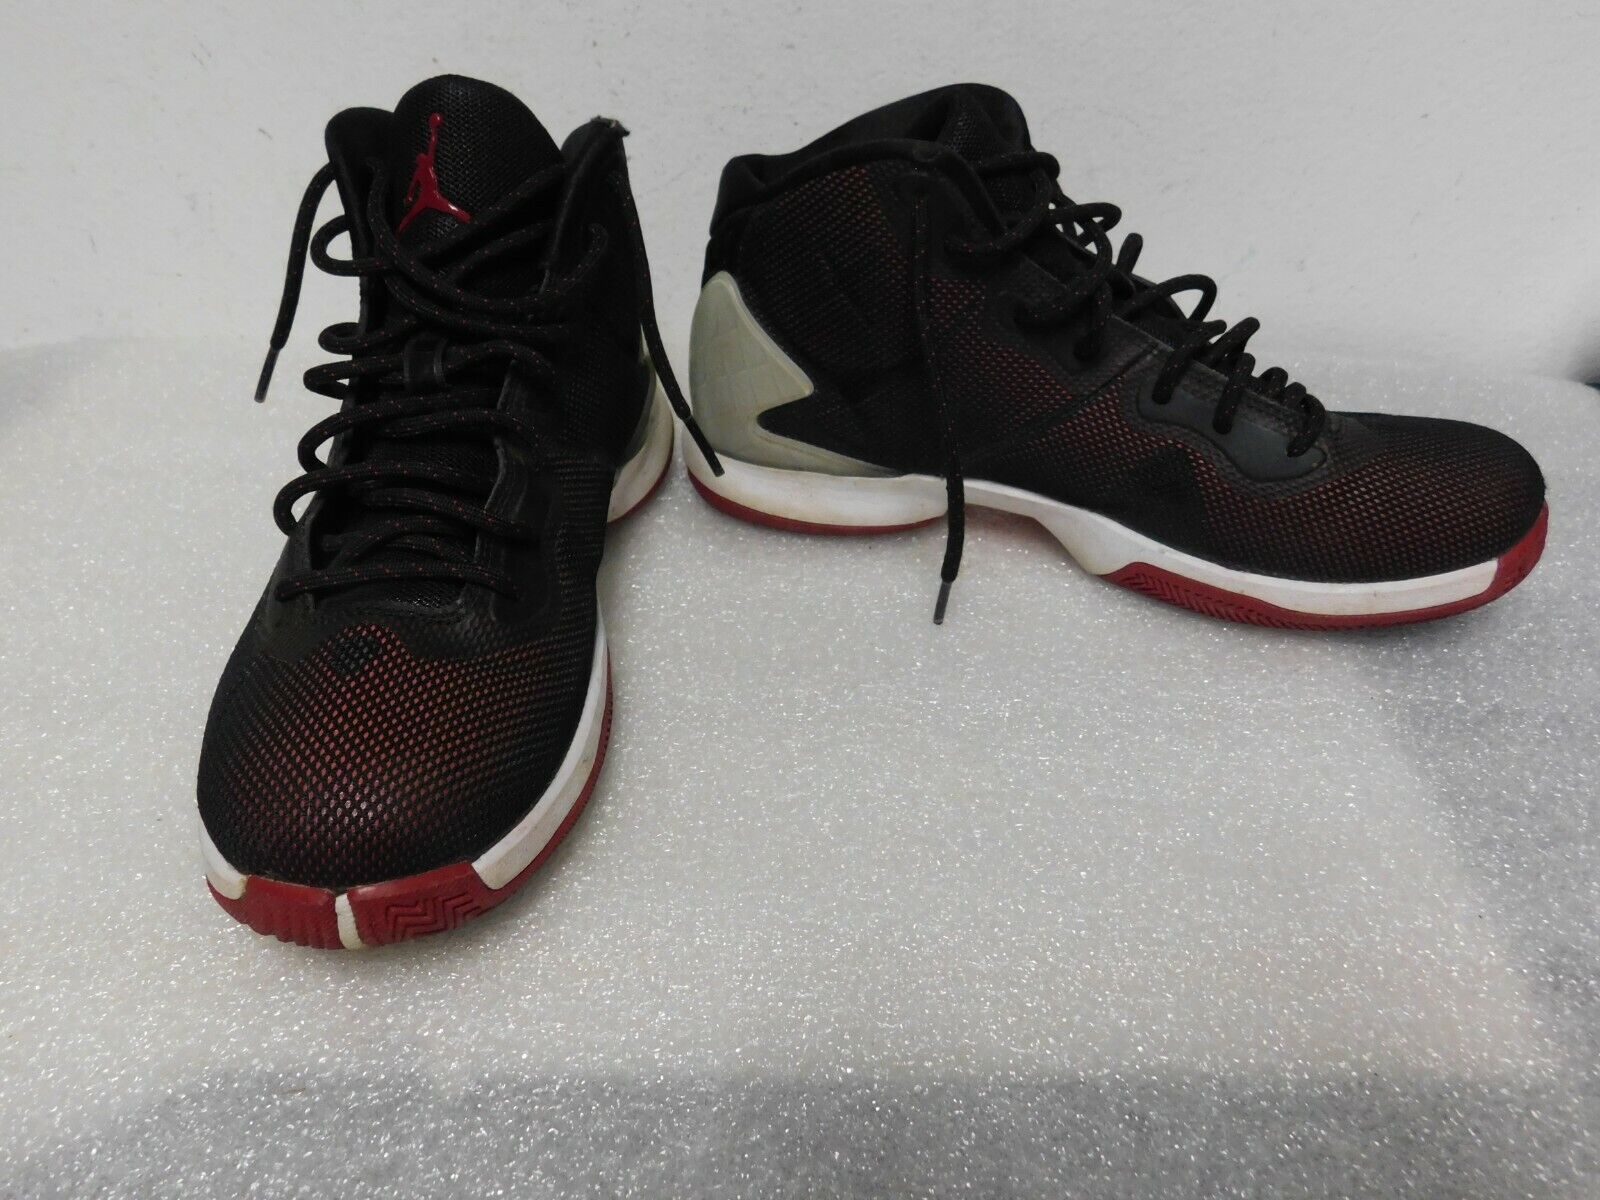 Jordan Super Fly 4BG sneakers size 7Y boys youth Black and Red 768930